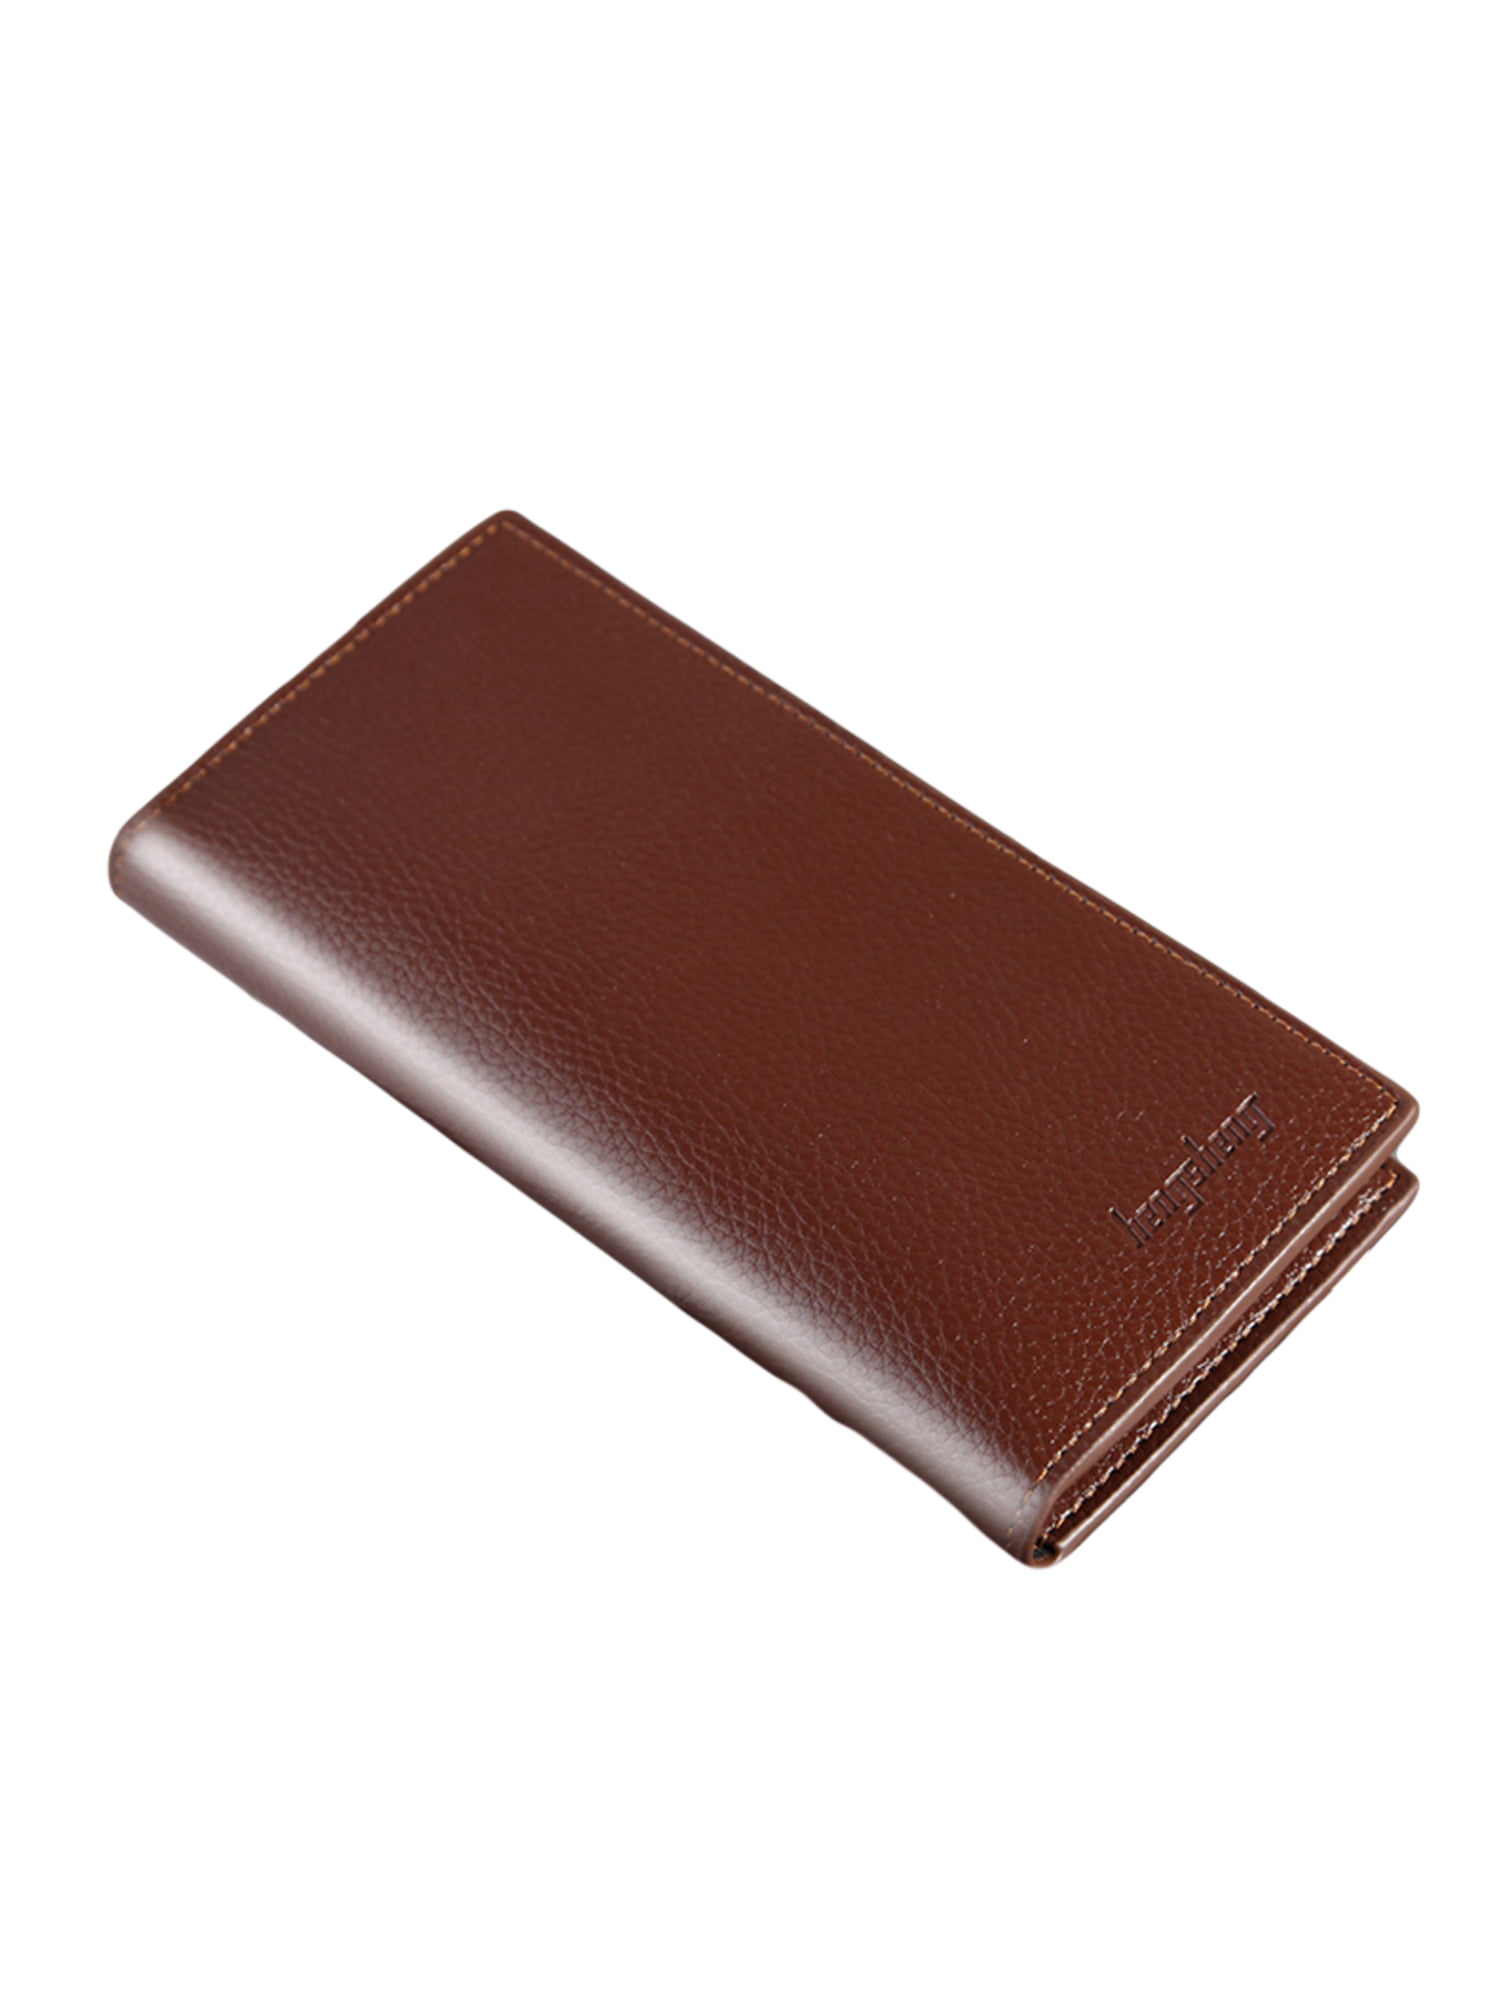 Mens Luxury Soft Quality Leather Wallet Credit Card Holder Purse Brown with Zip 